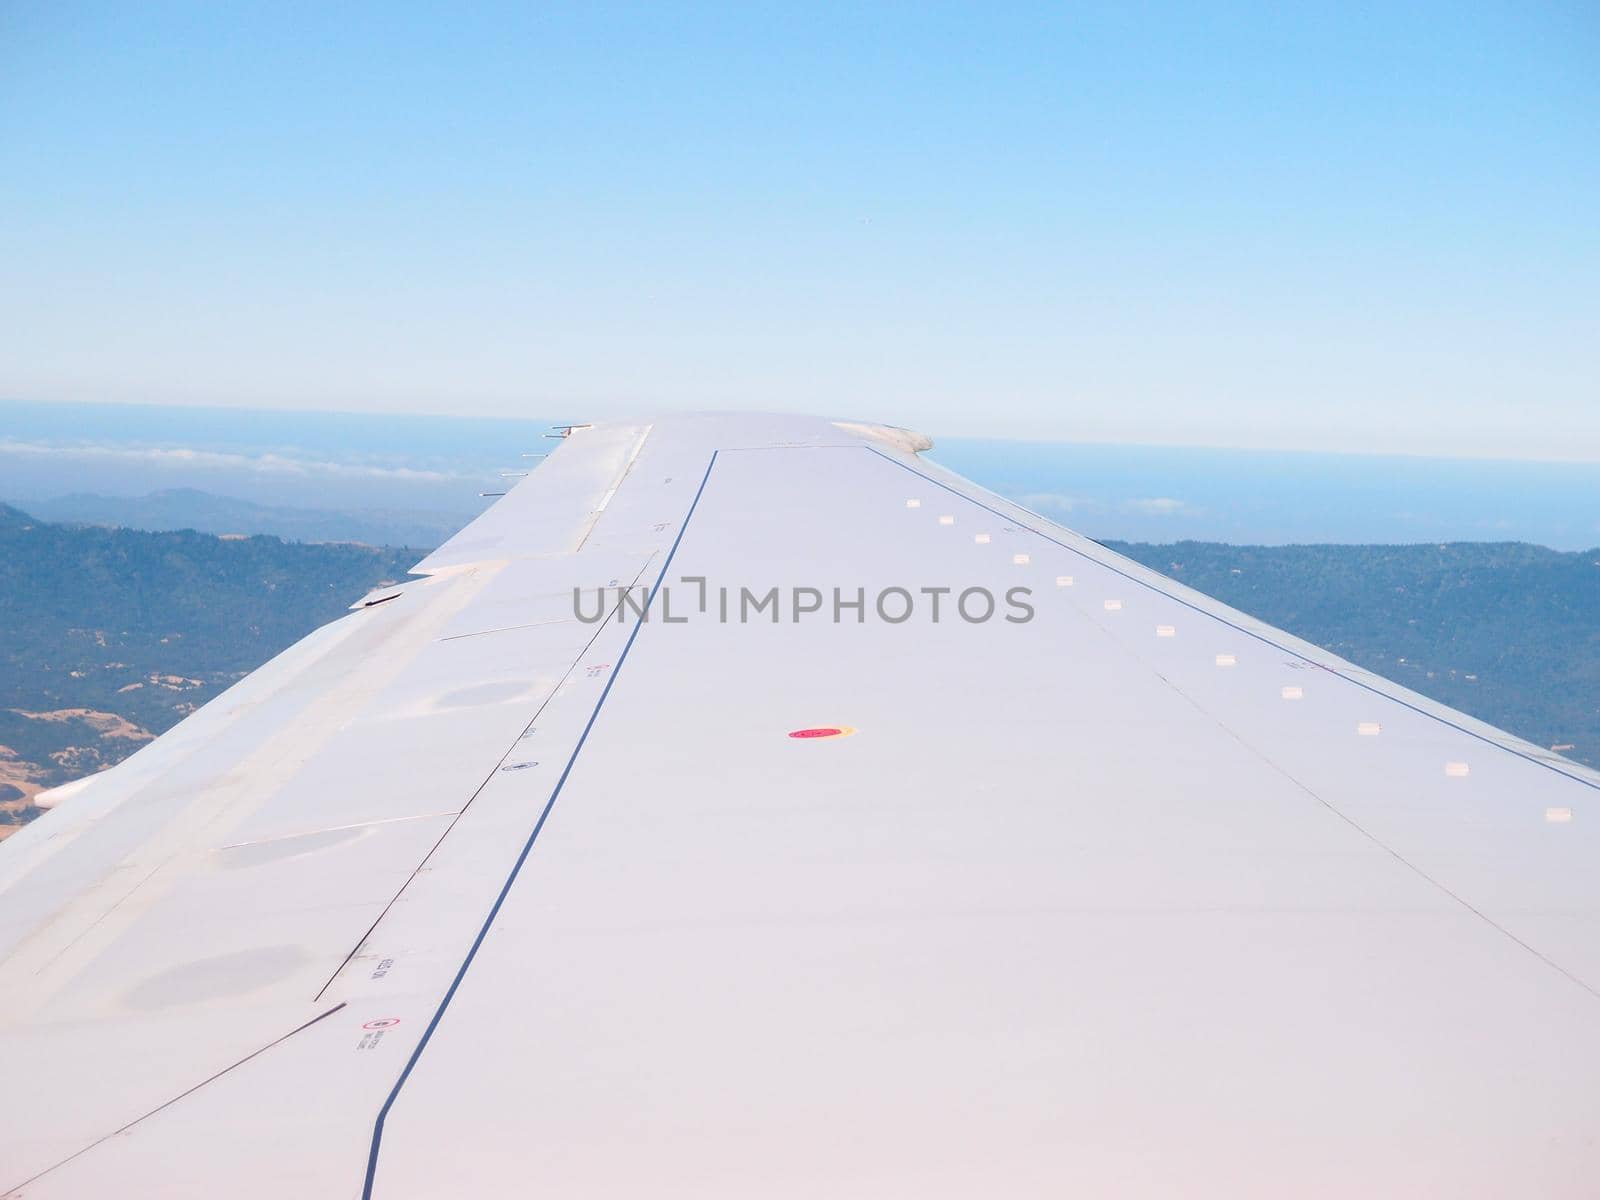 San Francisco - June 13, 2013: Wing of airlines plane flying in the air above city of San Francisco and ocean.